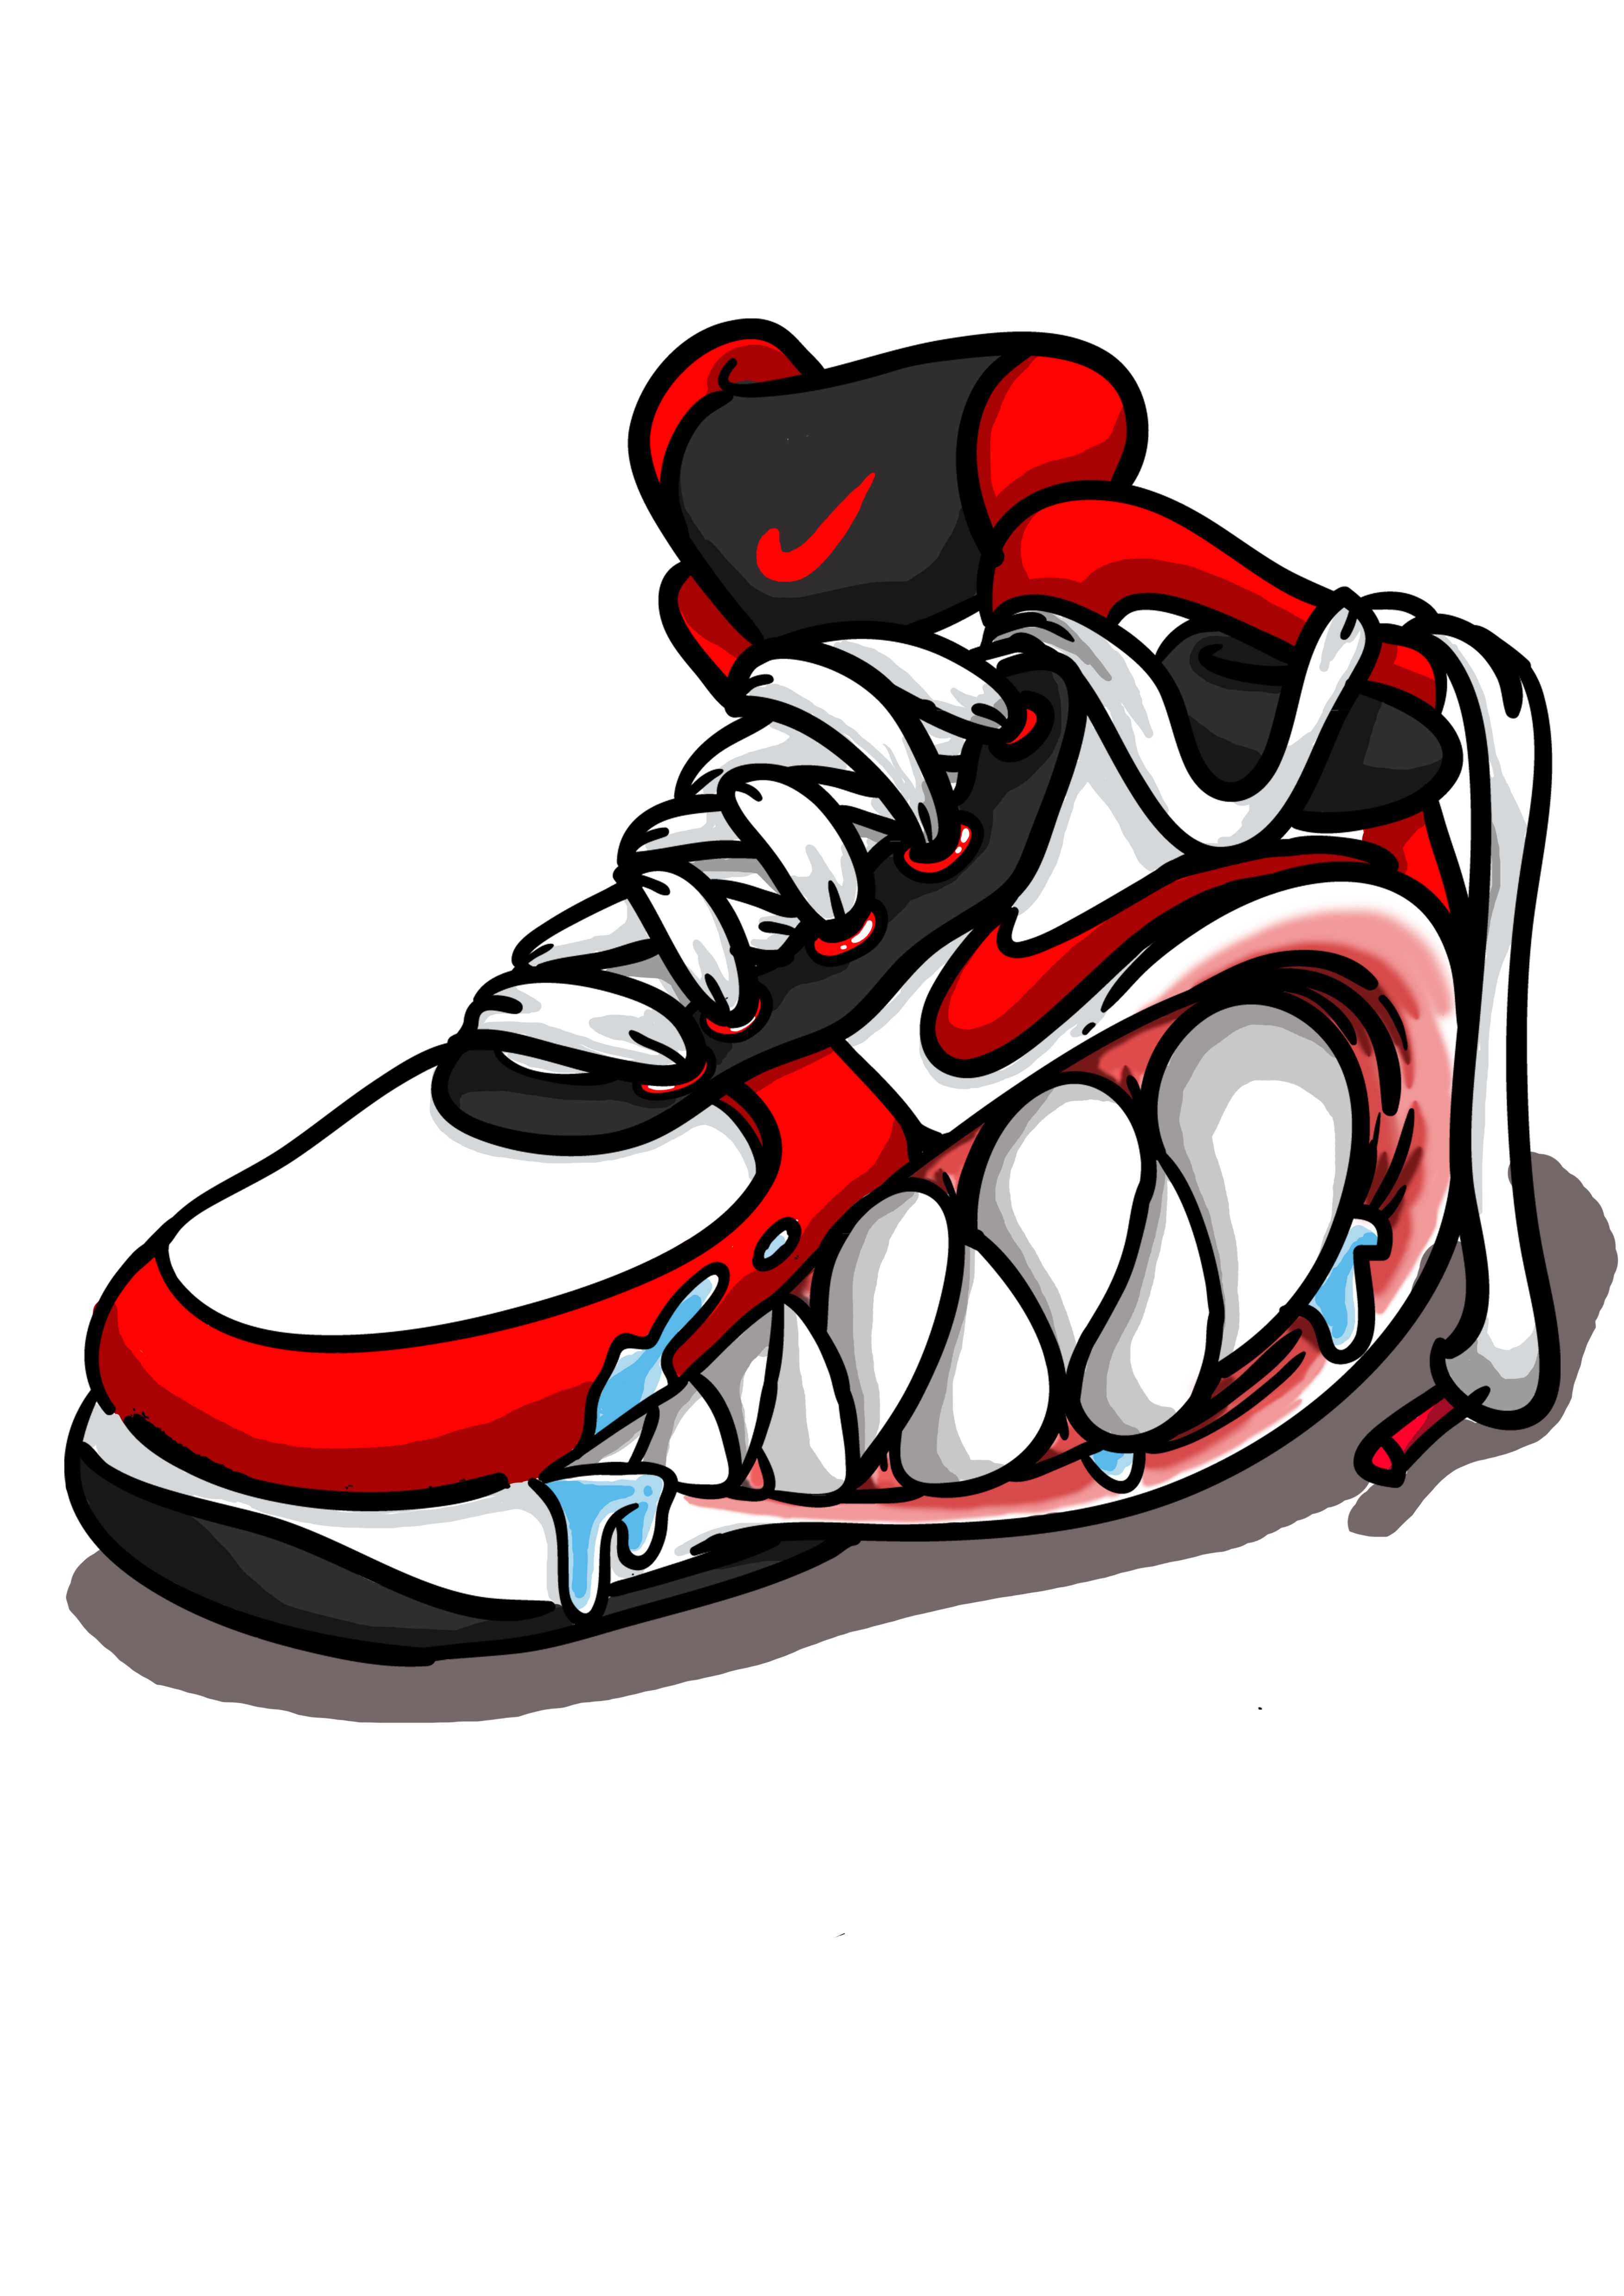 Download Nike Air Vector at Vectorified.com | Collection of Nike ...